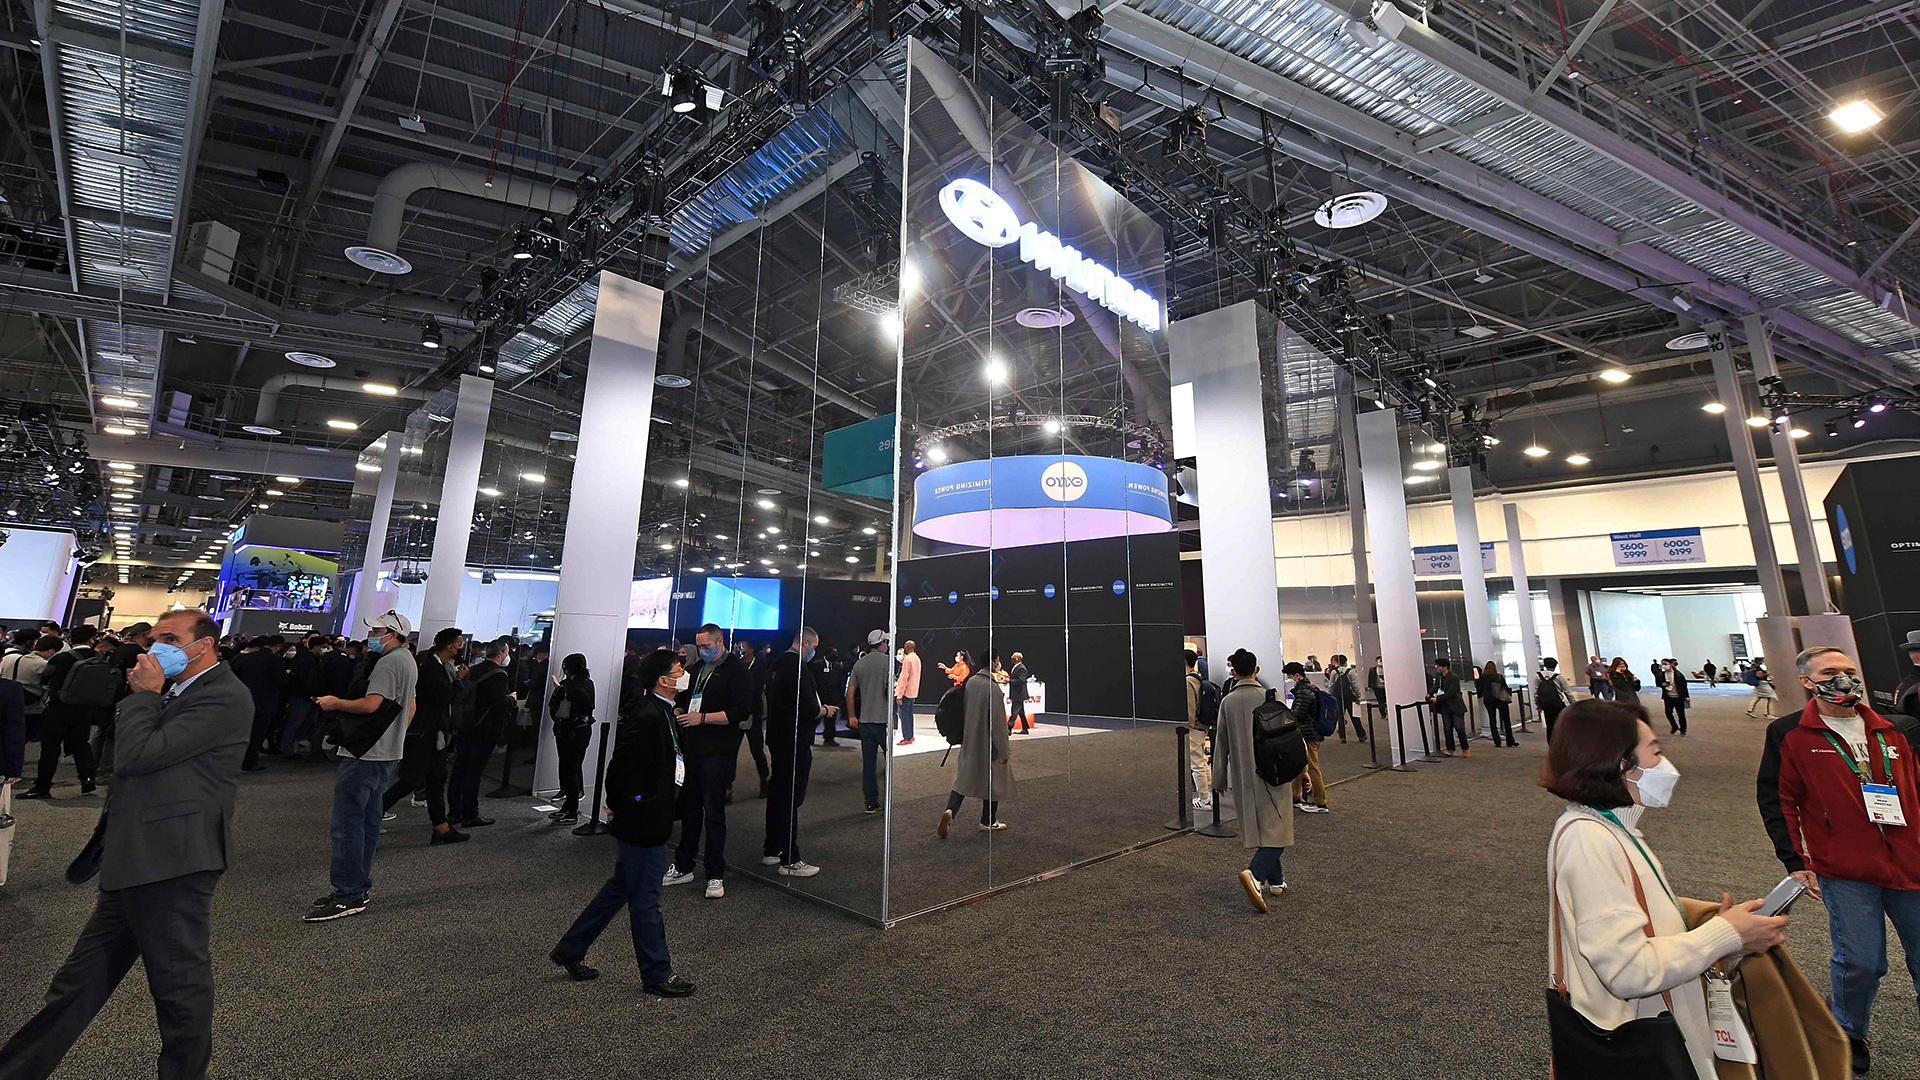 Hyundai's booth at CES 2022 and people